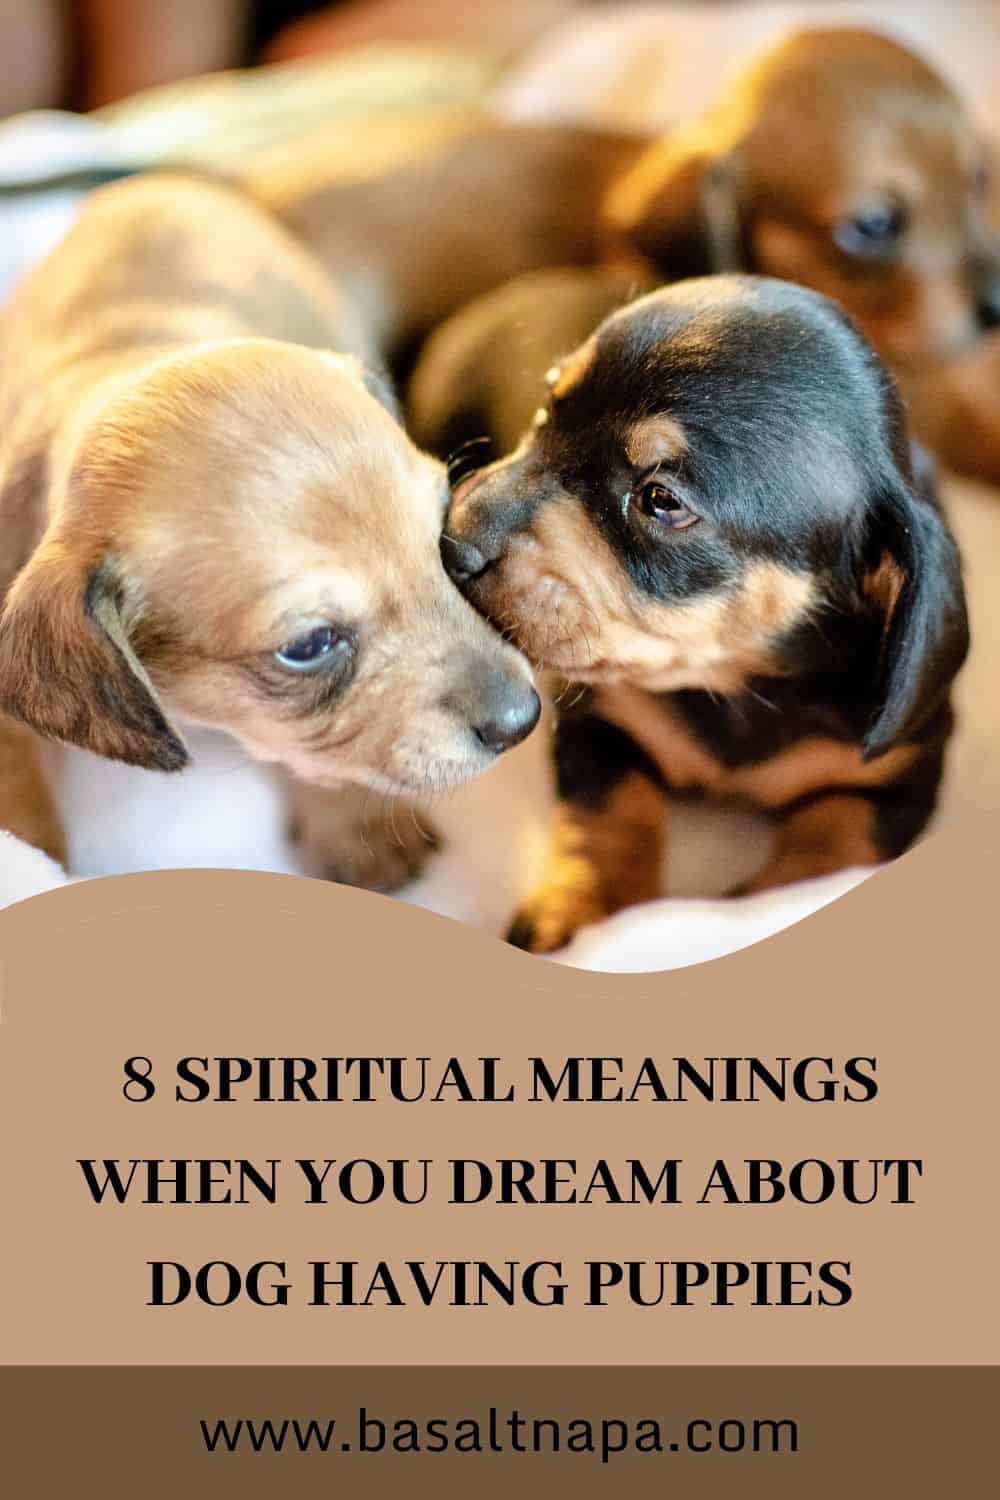 8 Puppy & Dog Dream Meanings